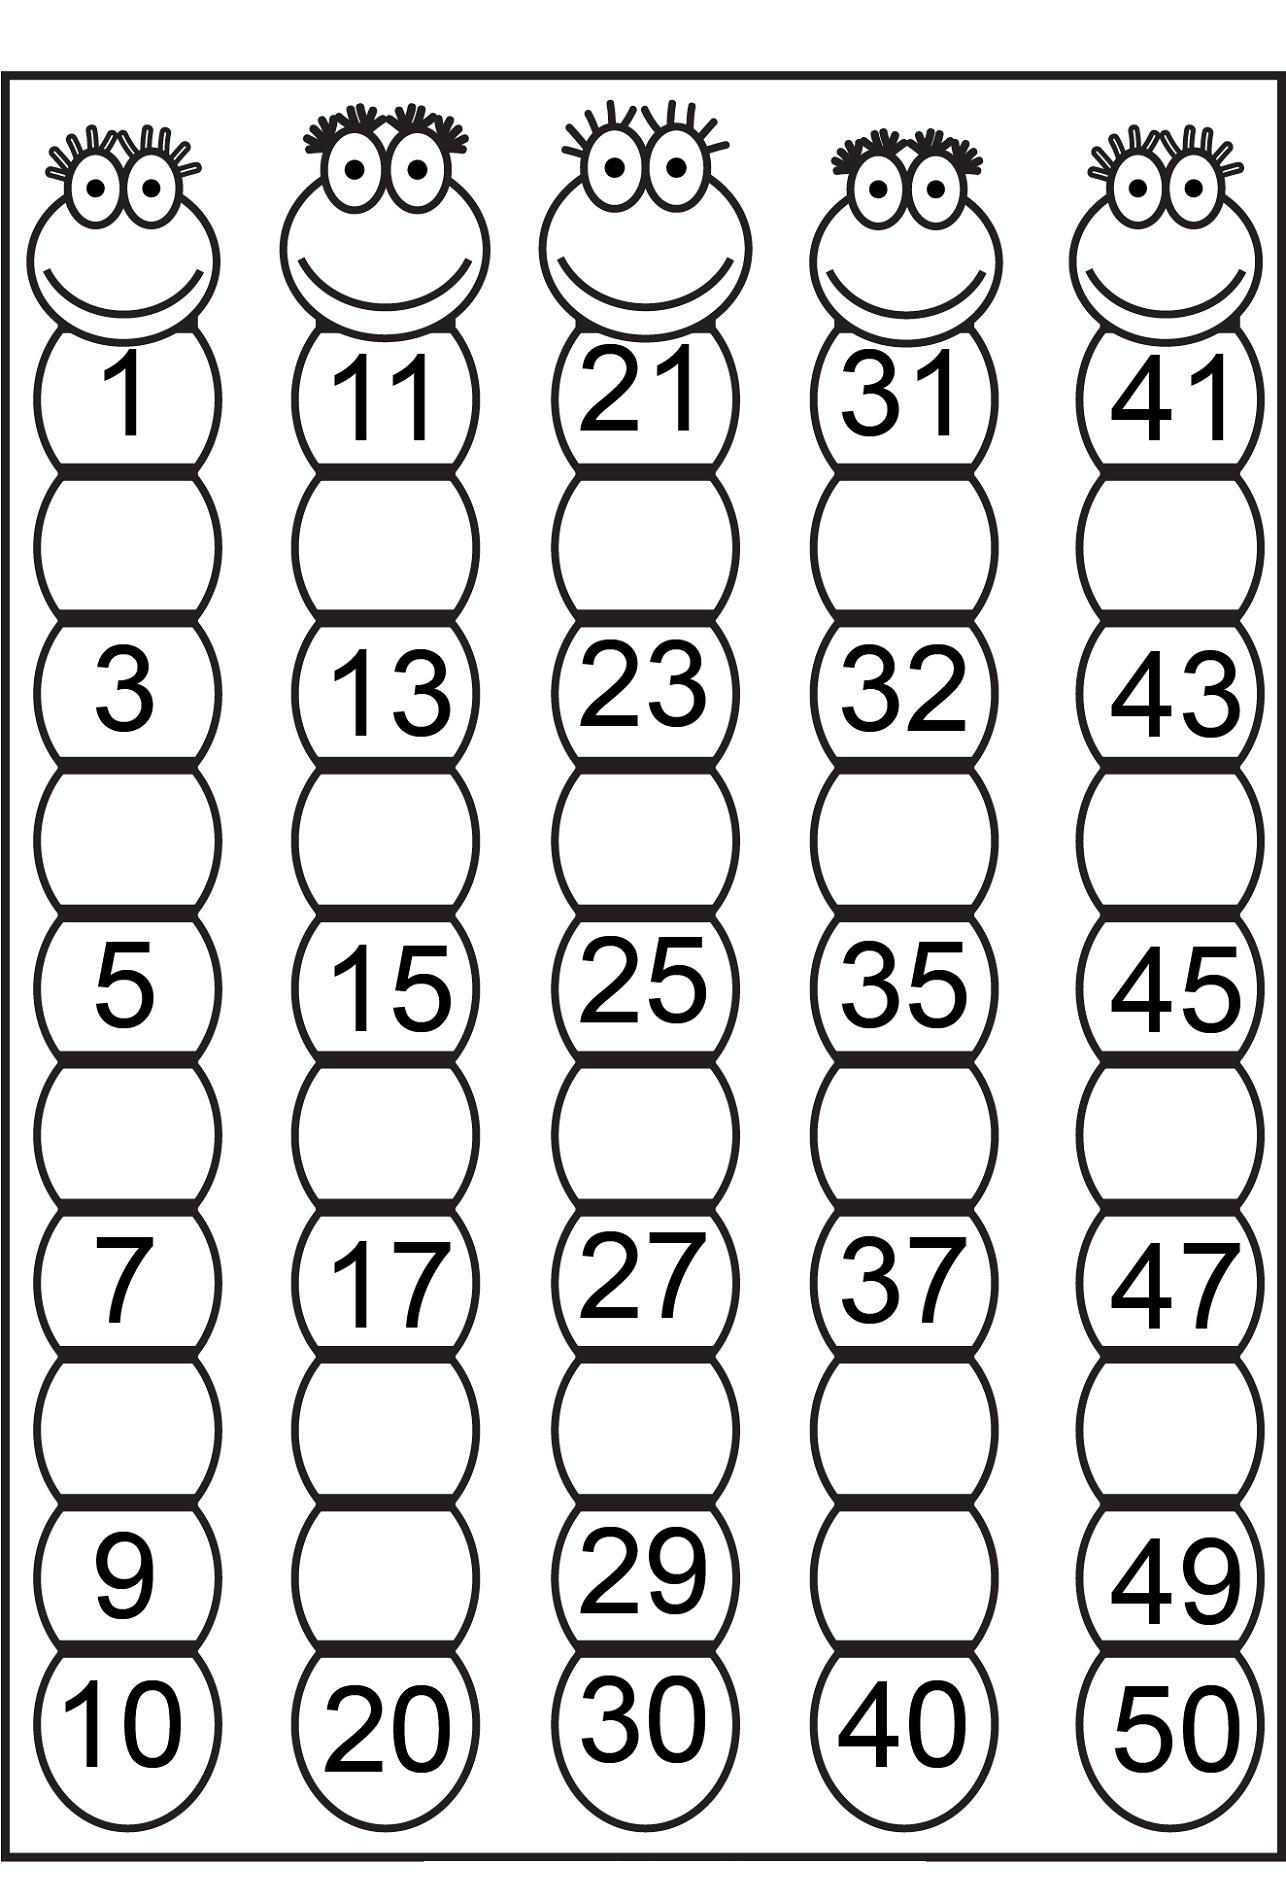 number chart 1-50 for math